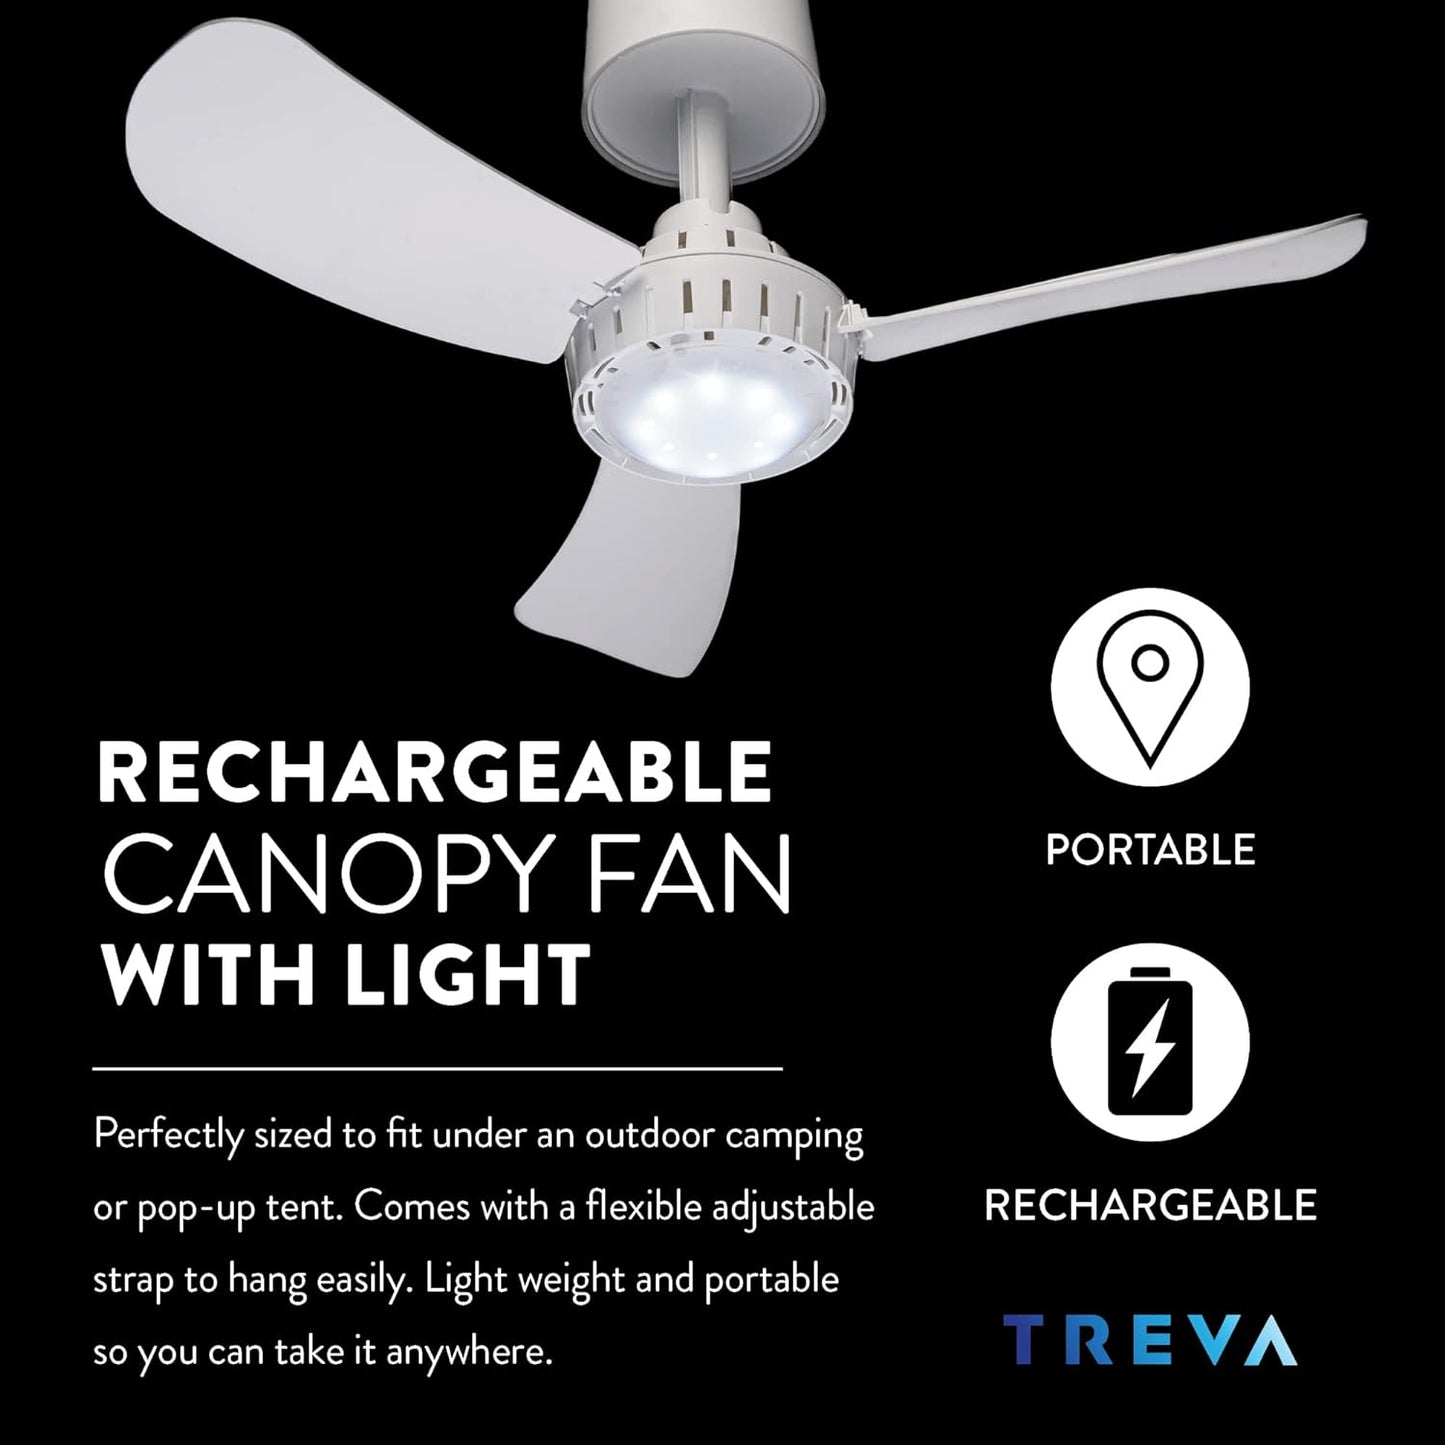 Treva Rechargeable Canopy Fan Easy to Assemble Portable Ceiling Fan For Your Outdoor Canopy Tent and Gazebo, Remote Control, 2 Speed Setting with LED Lighting No Tools Required.